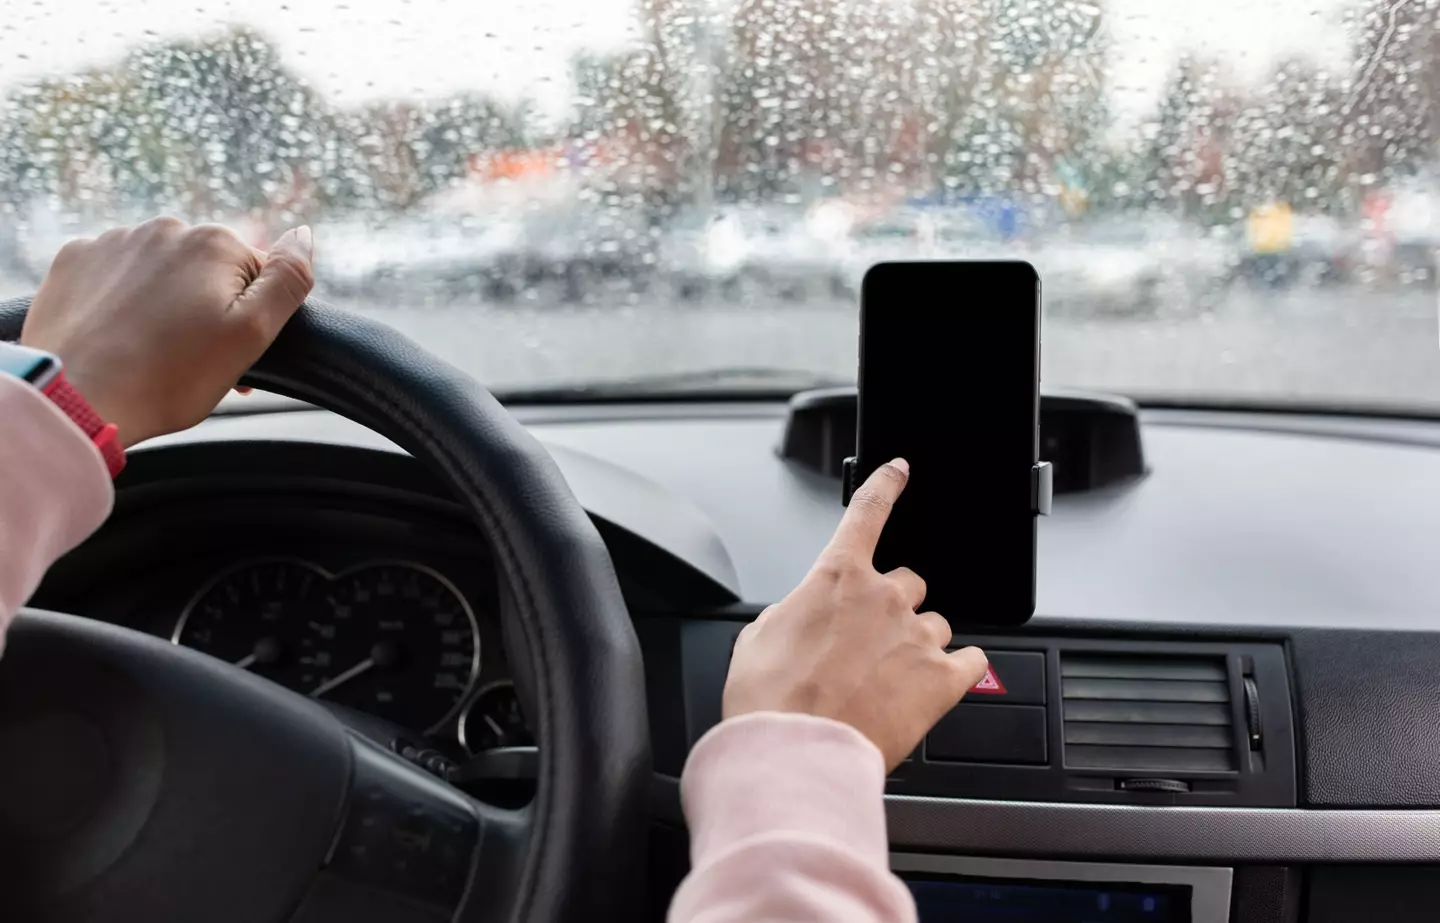 Drivers have been warned not to mess with their phone when the alarm goes off.